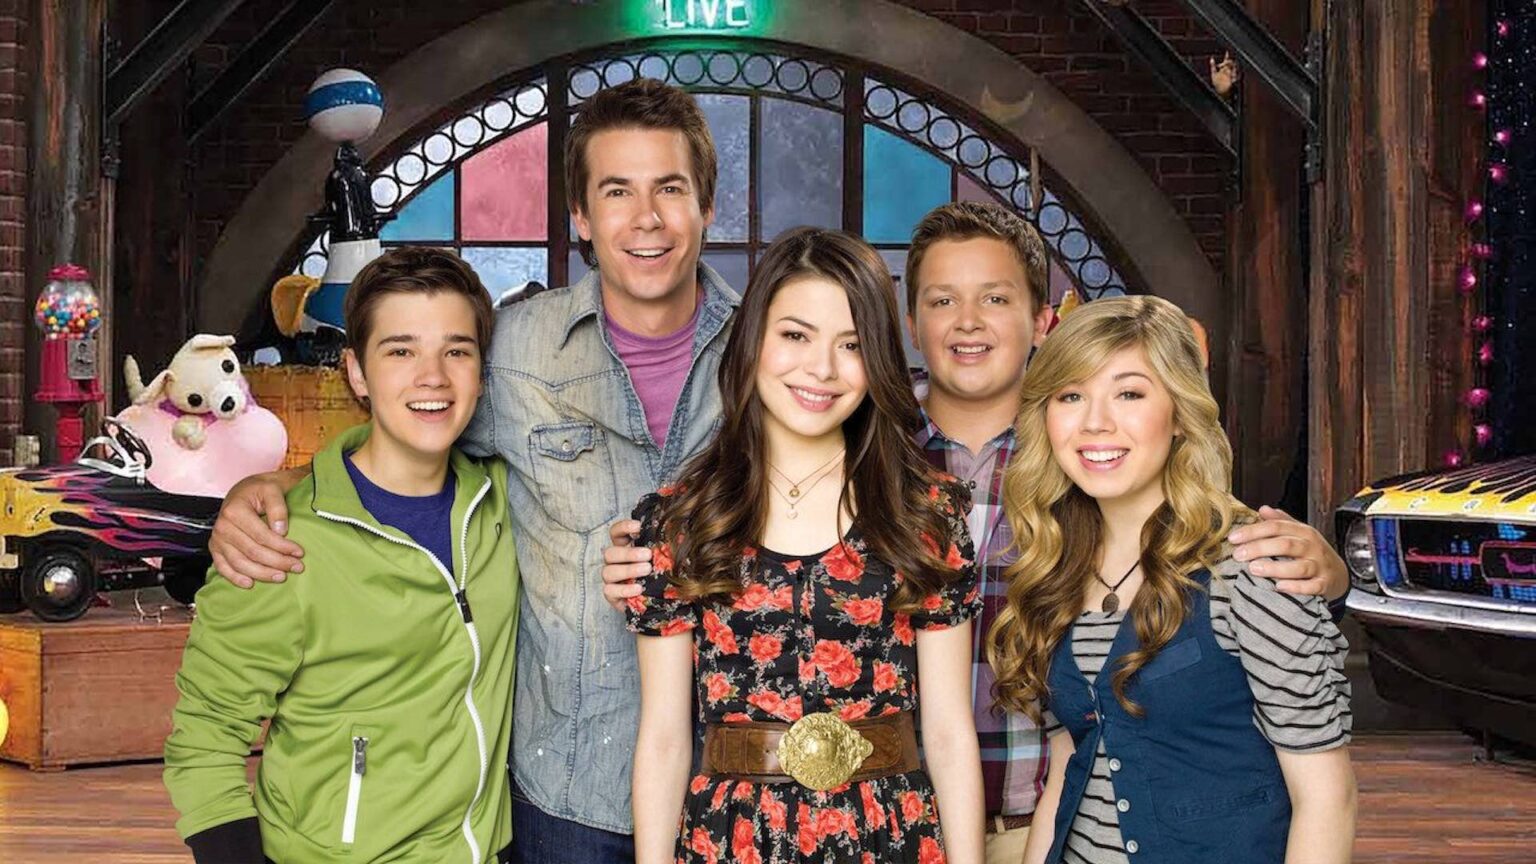 Hearing all this talk about Nickelodeon's Dan Schneider? It's mostly negative and very concerning. Check out what we know so far!